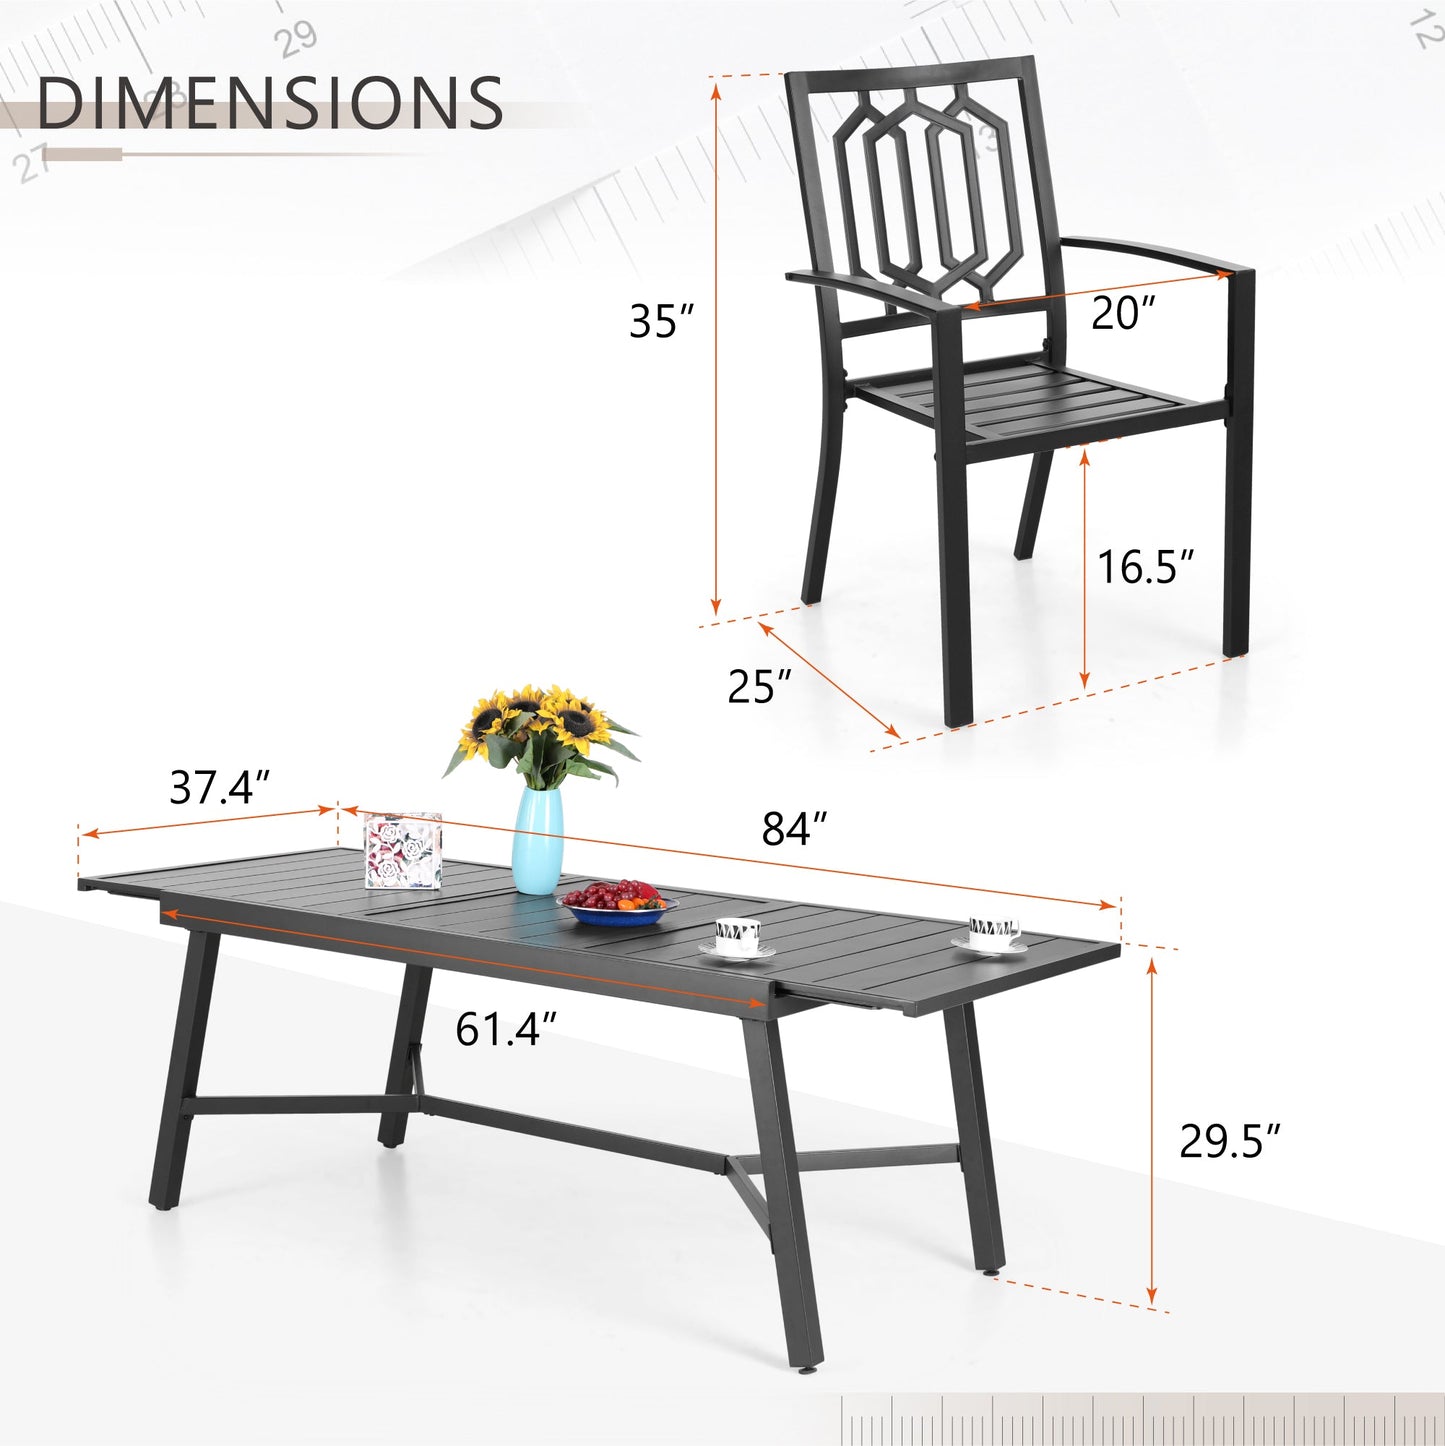 Sophia & William 9 Pieces Metal Outdoor Patio Dining Set with Extendable Table - Black